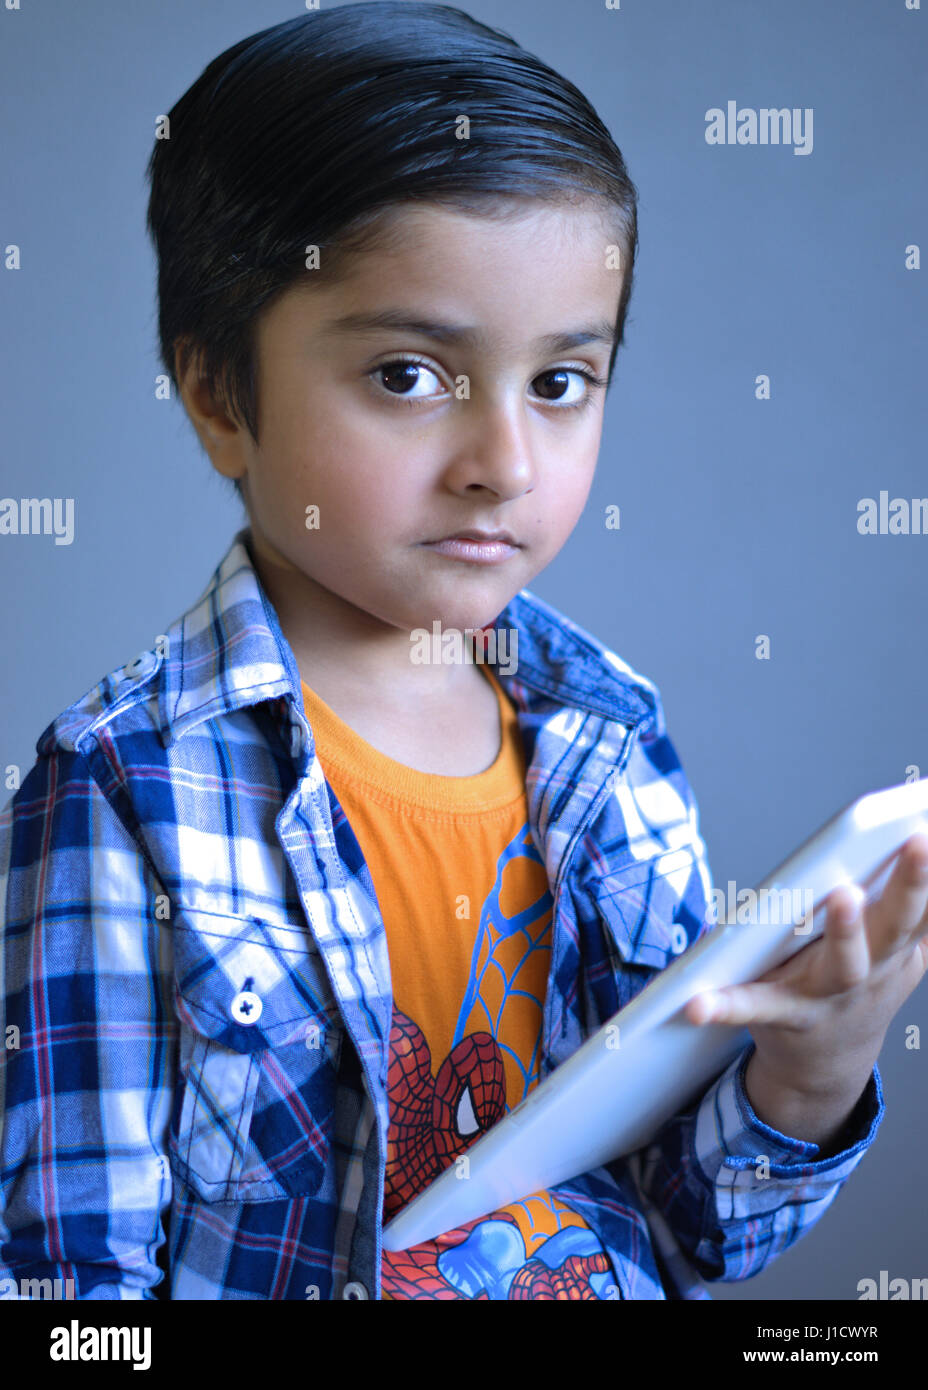 Smart Kid holding a tablet computer looking towards the camera lens Stock  Photo - Alamy